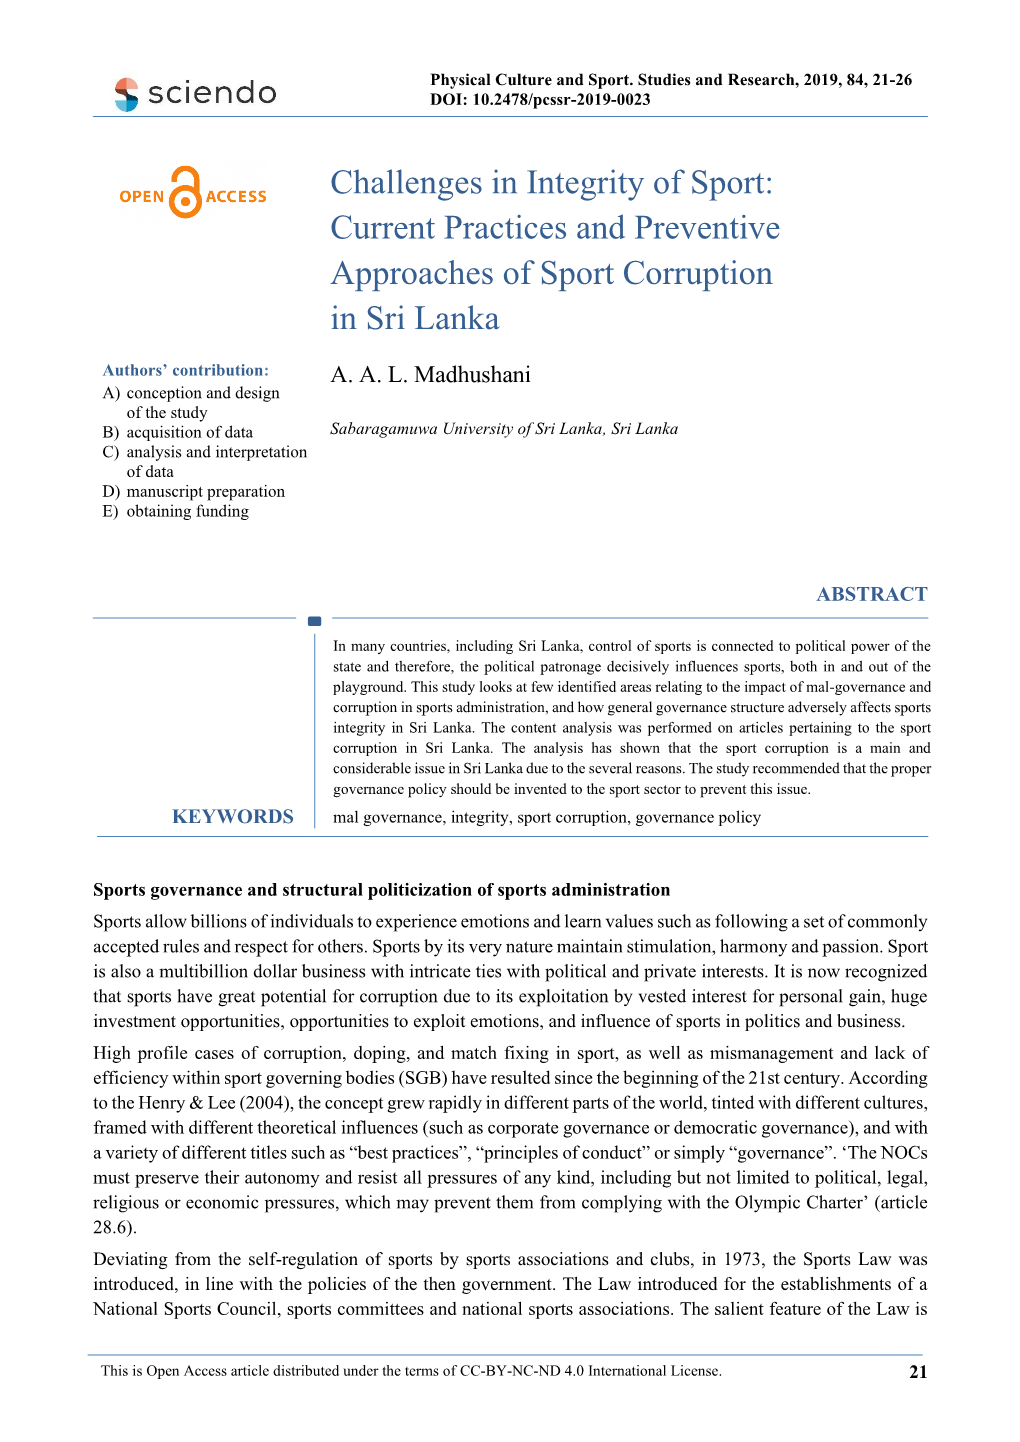 Current Practices and Preventive Approaches of Sport Corruption in Sri Lanka